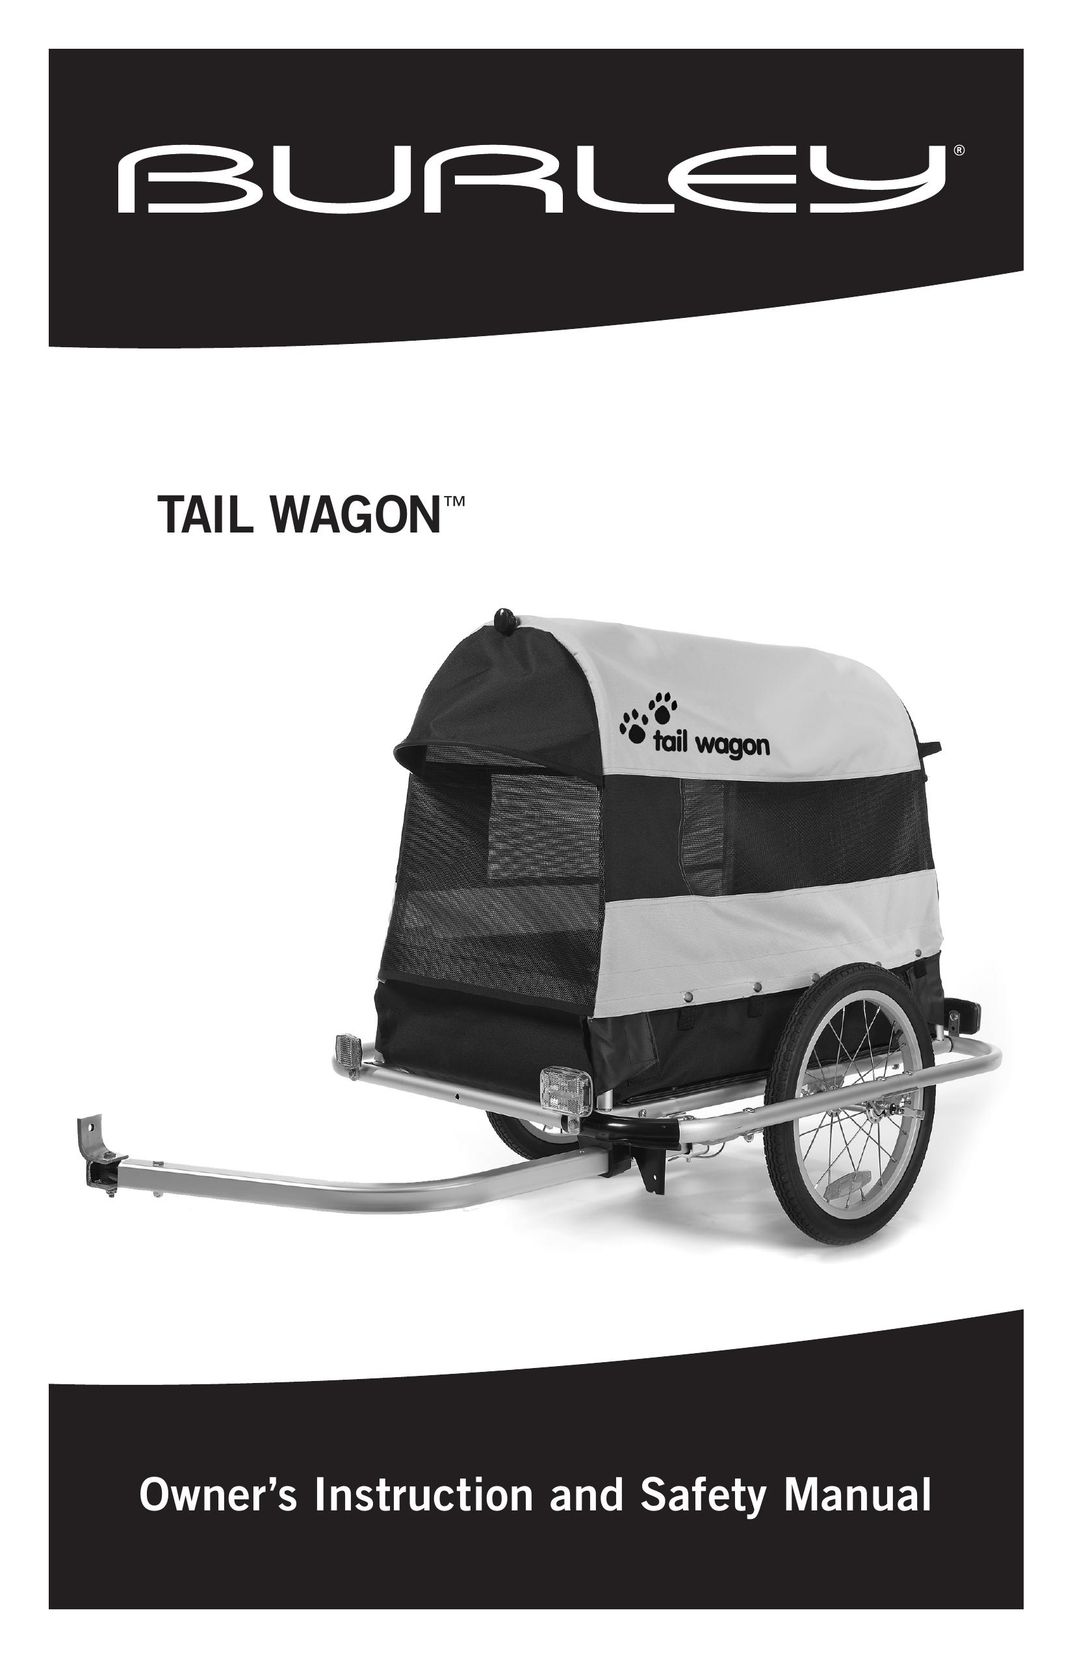 Burley Tail Wagon Riding Toy User Manual